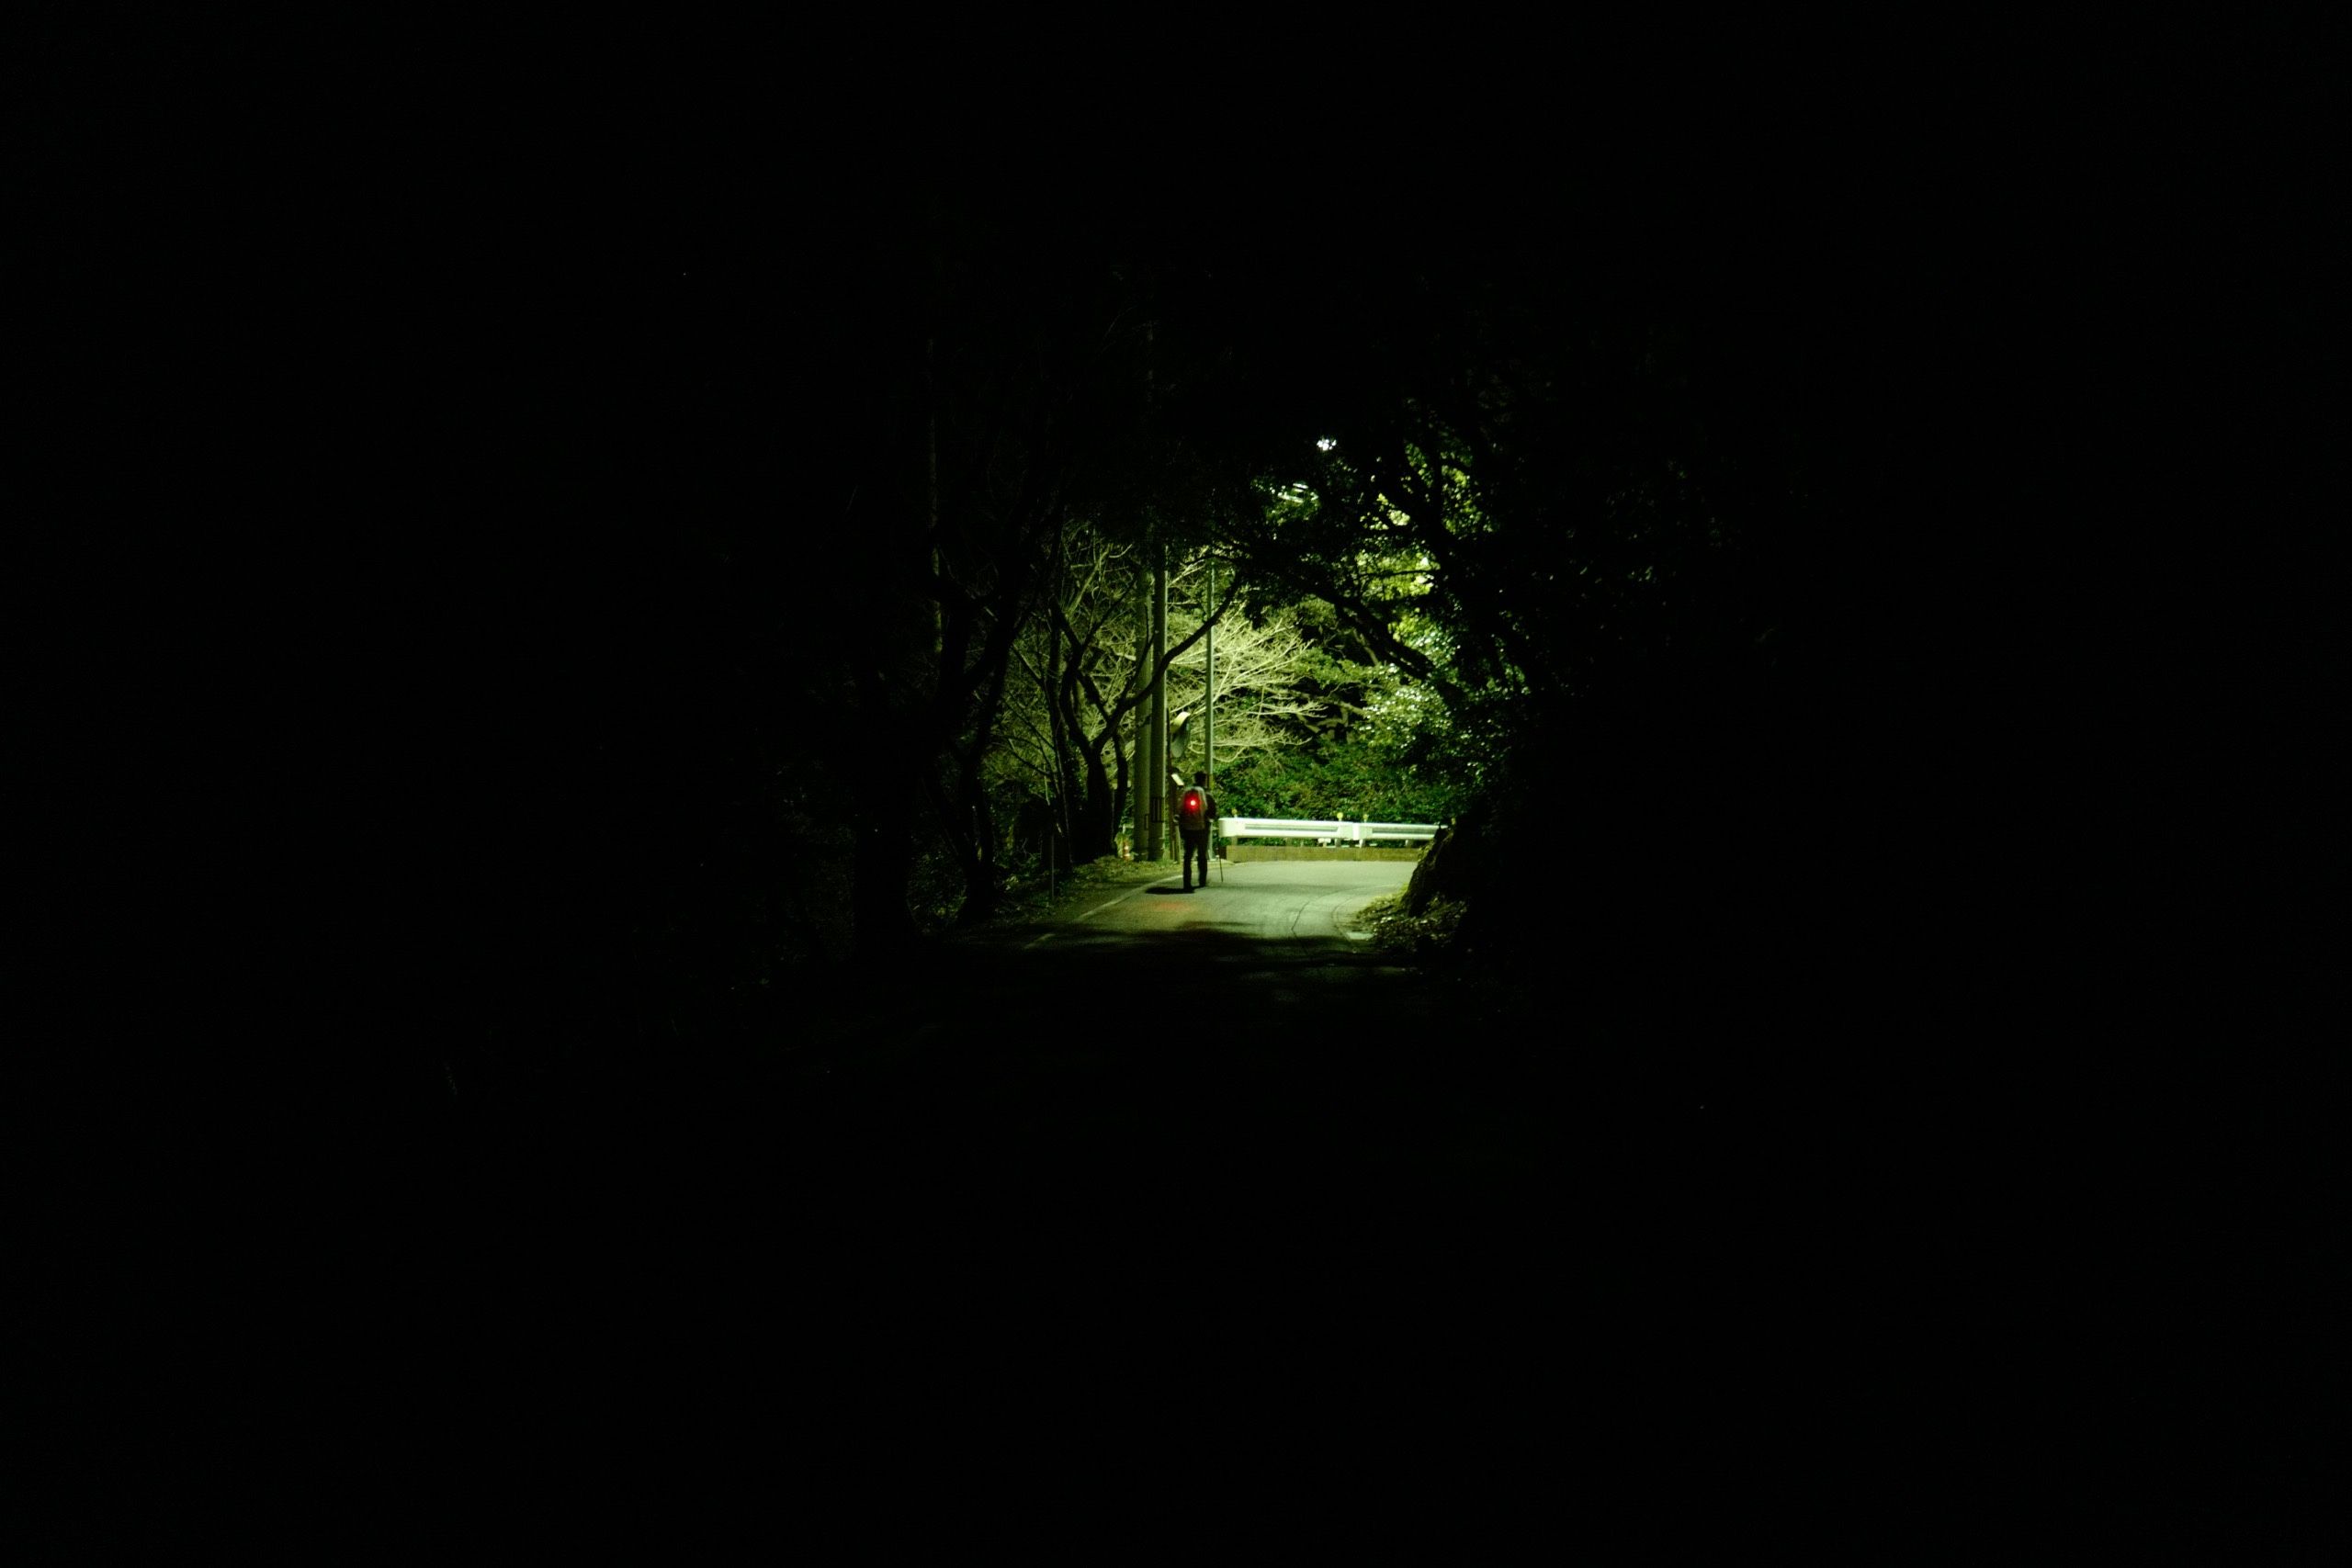 In the middle distance, a man, Peter Orosz, walks down a road in darkness, illuminated by a single streetlight.